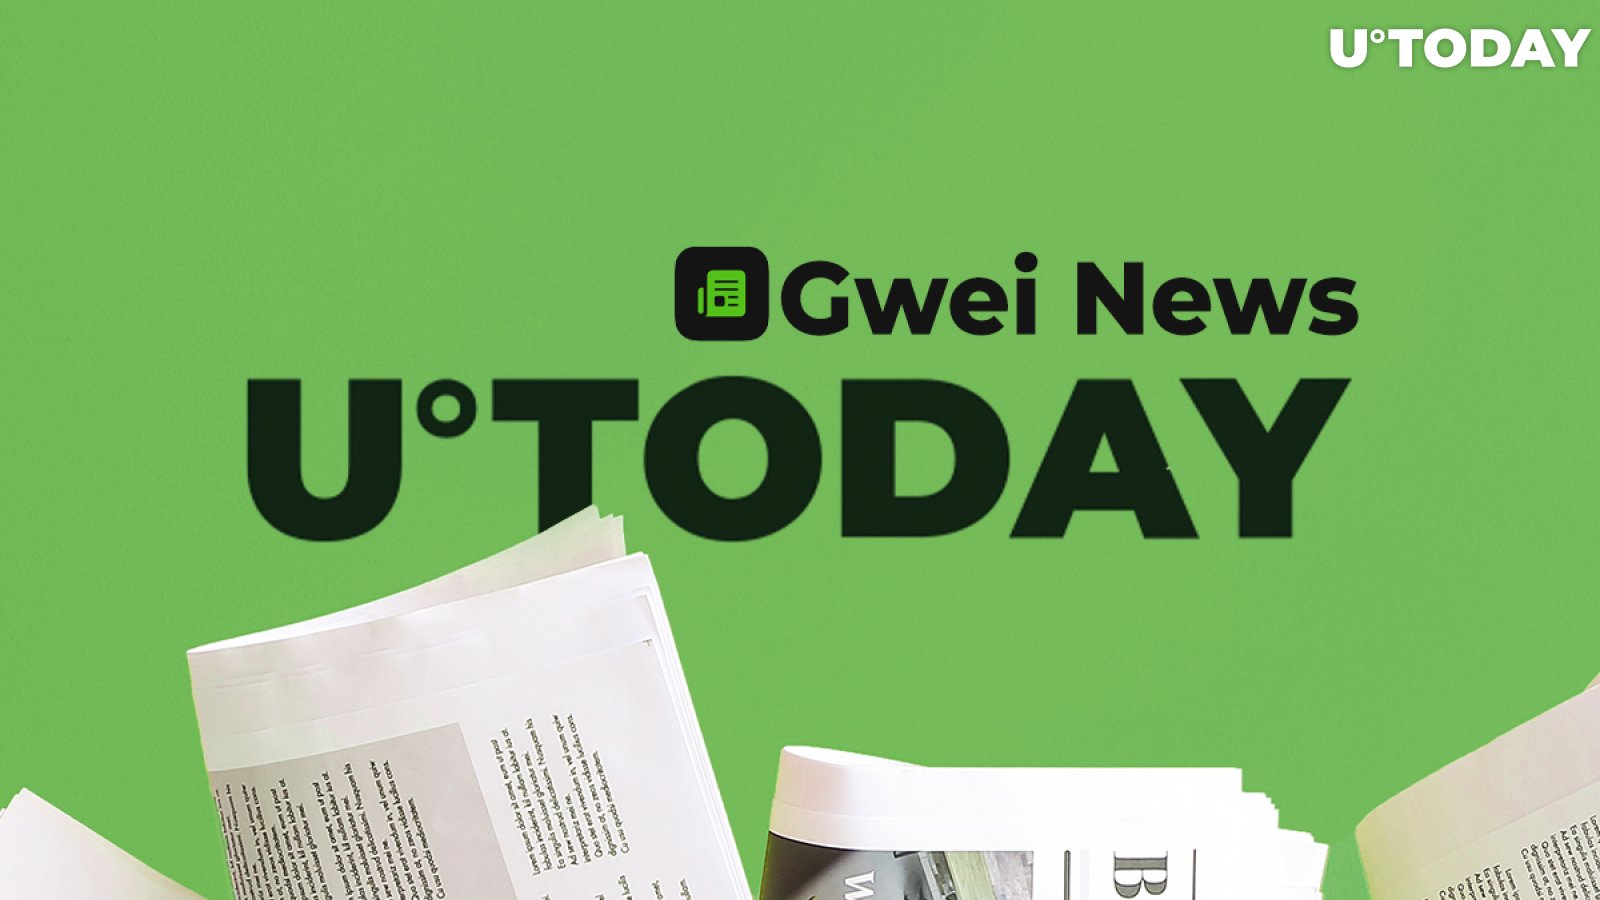 U.Today News and Articles Are Now on Gwei News